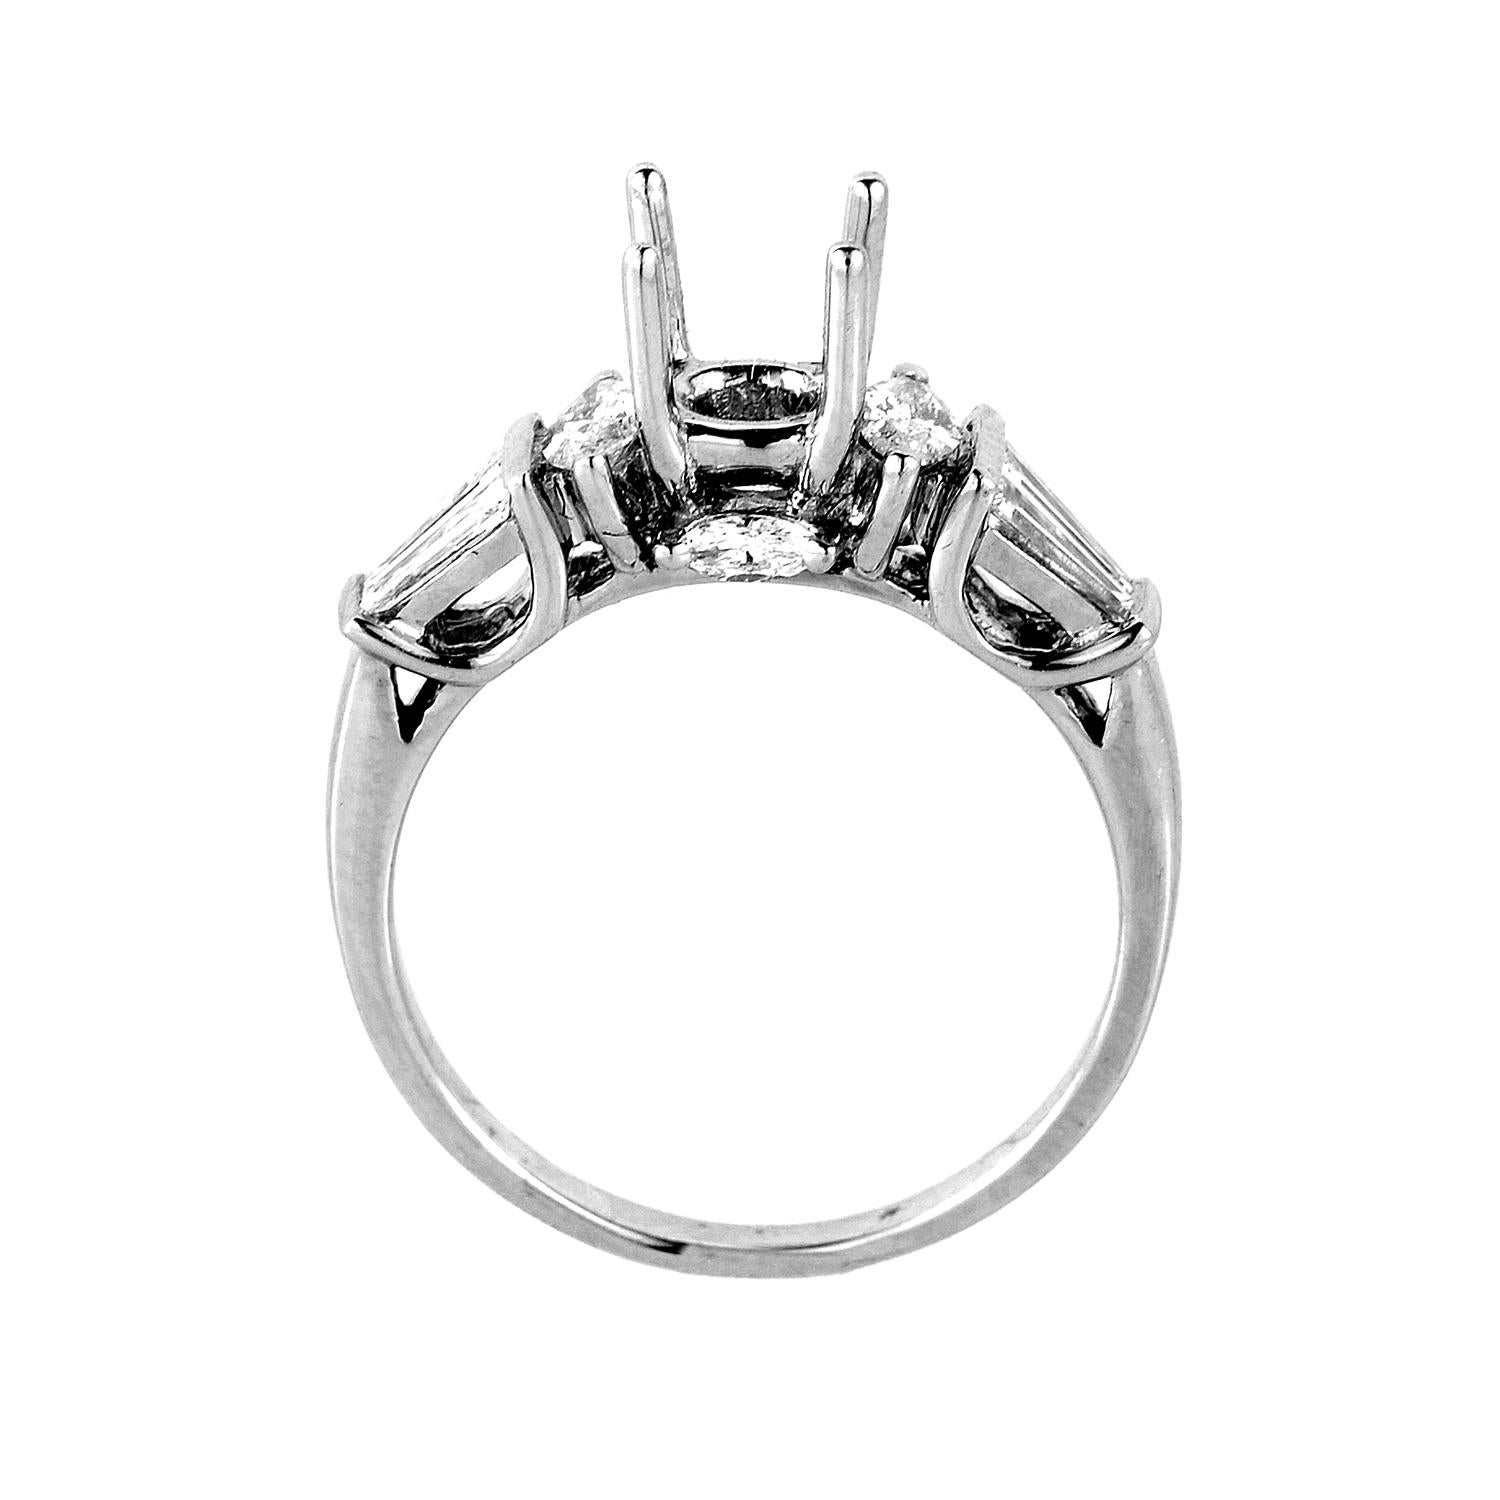 This gorgeous engagement ring setting from Natalie K is chic and refined; perfect for a lady with timeless style. The setting is made of 14K white gold and features ~.68ct of diamonds. There are two sets of side stones; one set boasts a marquise cut